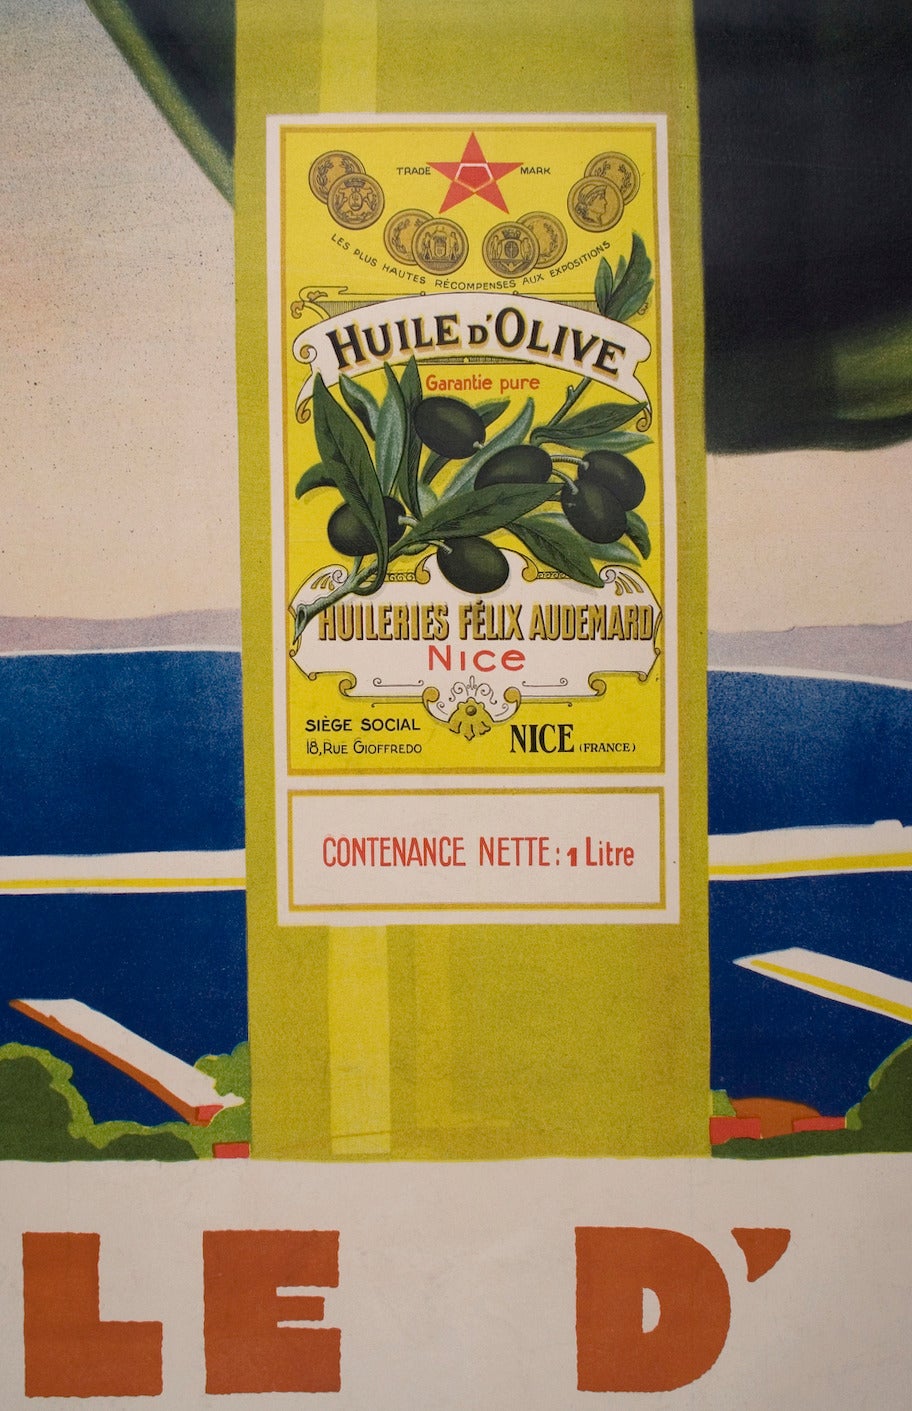 A striking two sheet French Art Deco period poster by Jean Mercier, 1928. This is an advertisement for Audemard olive oil produced in Nice, France.

Jean-Adrien Mercier (1899-1995) produced some of the most memorable French poster designs from the